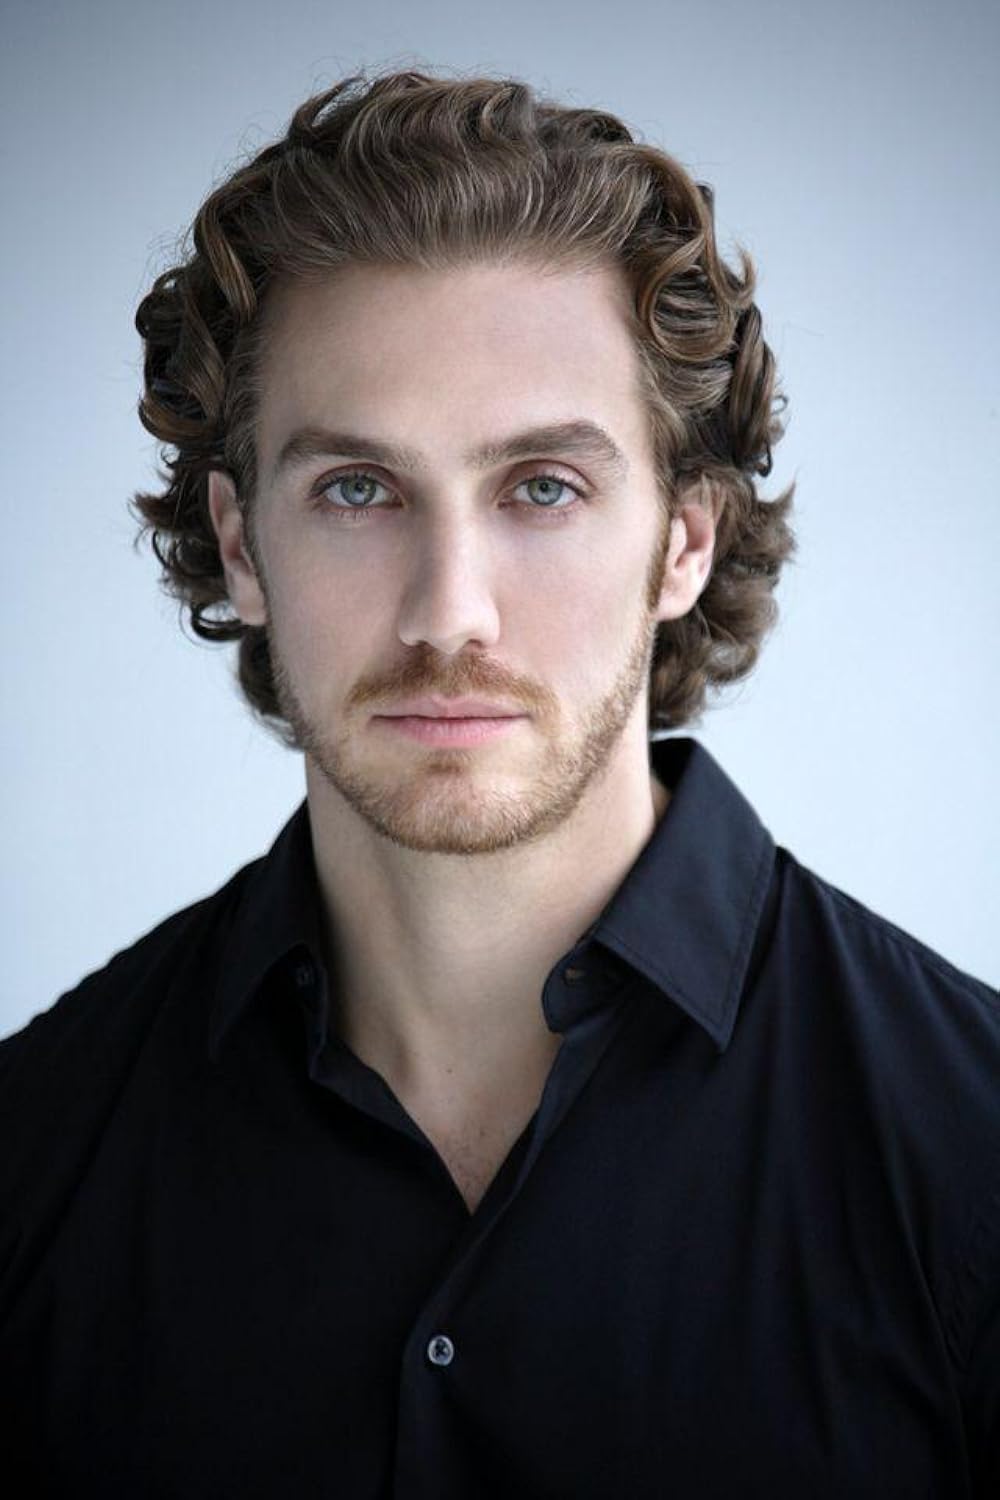 taille-eugenio-siller-Image